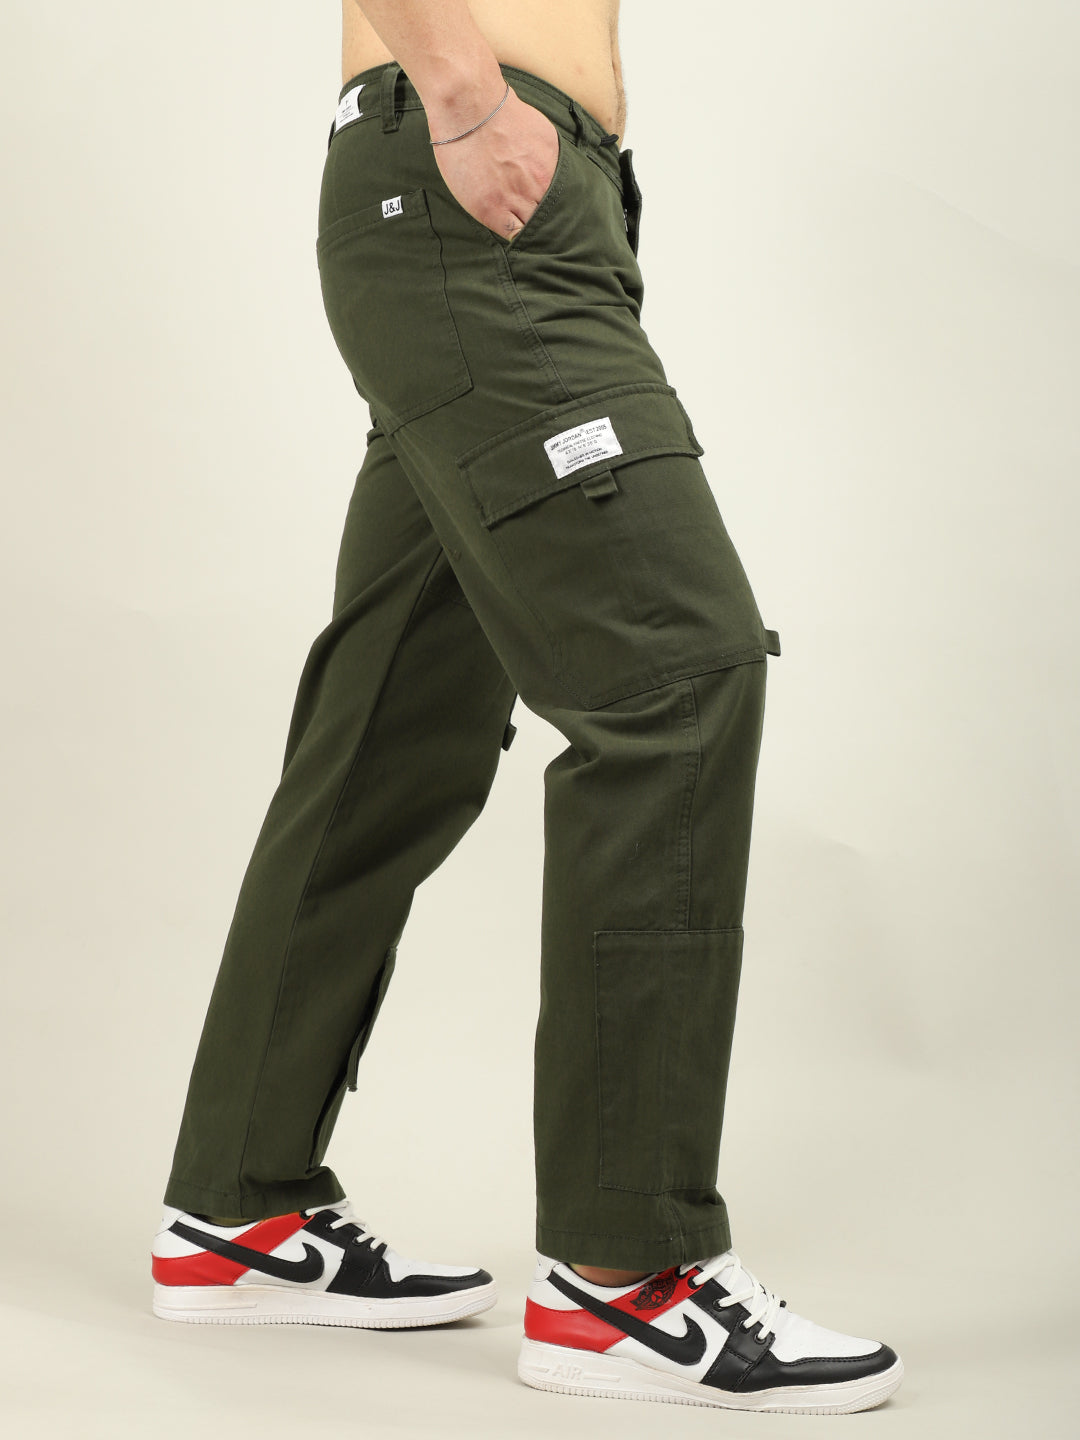 Drone Fantacy Olive Baggy Fit Cotton Cargo